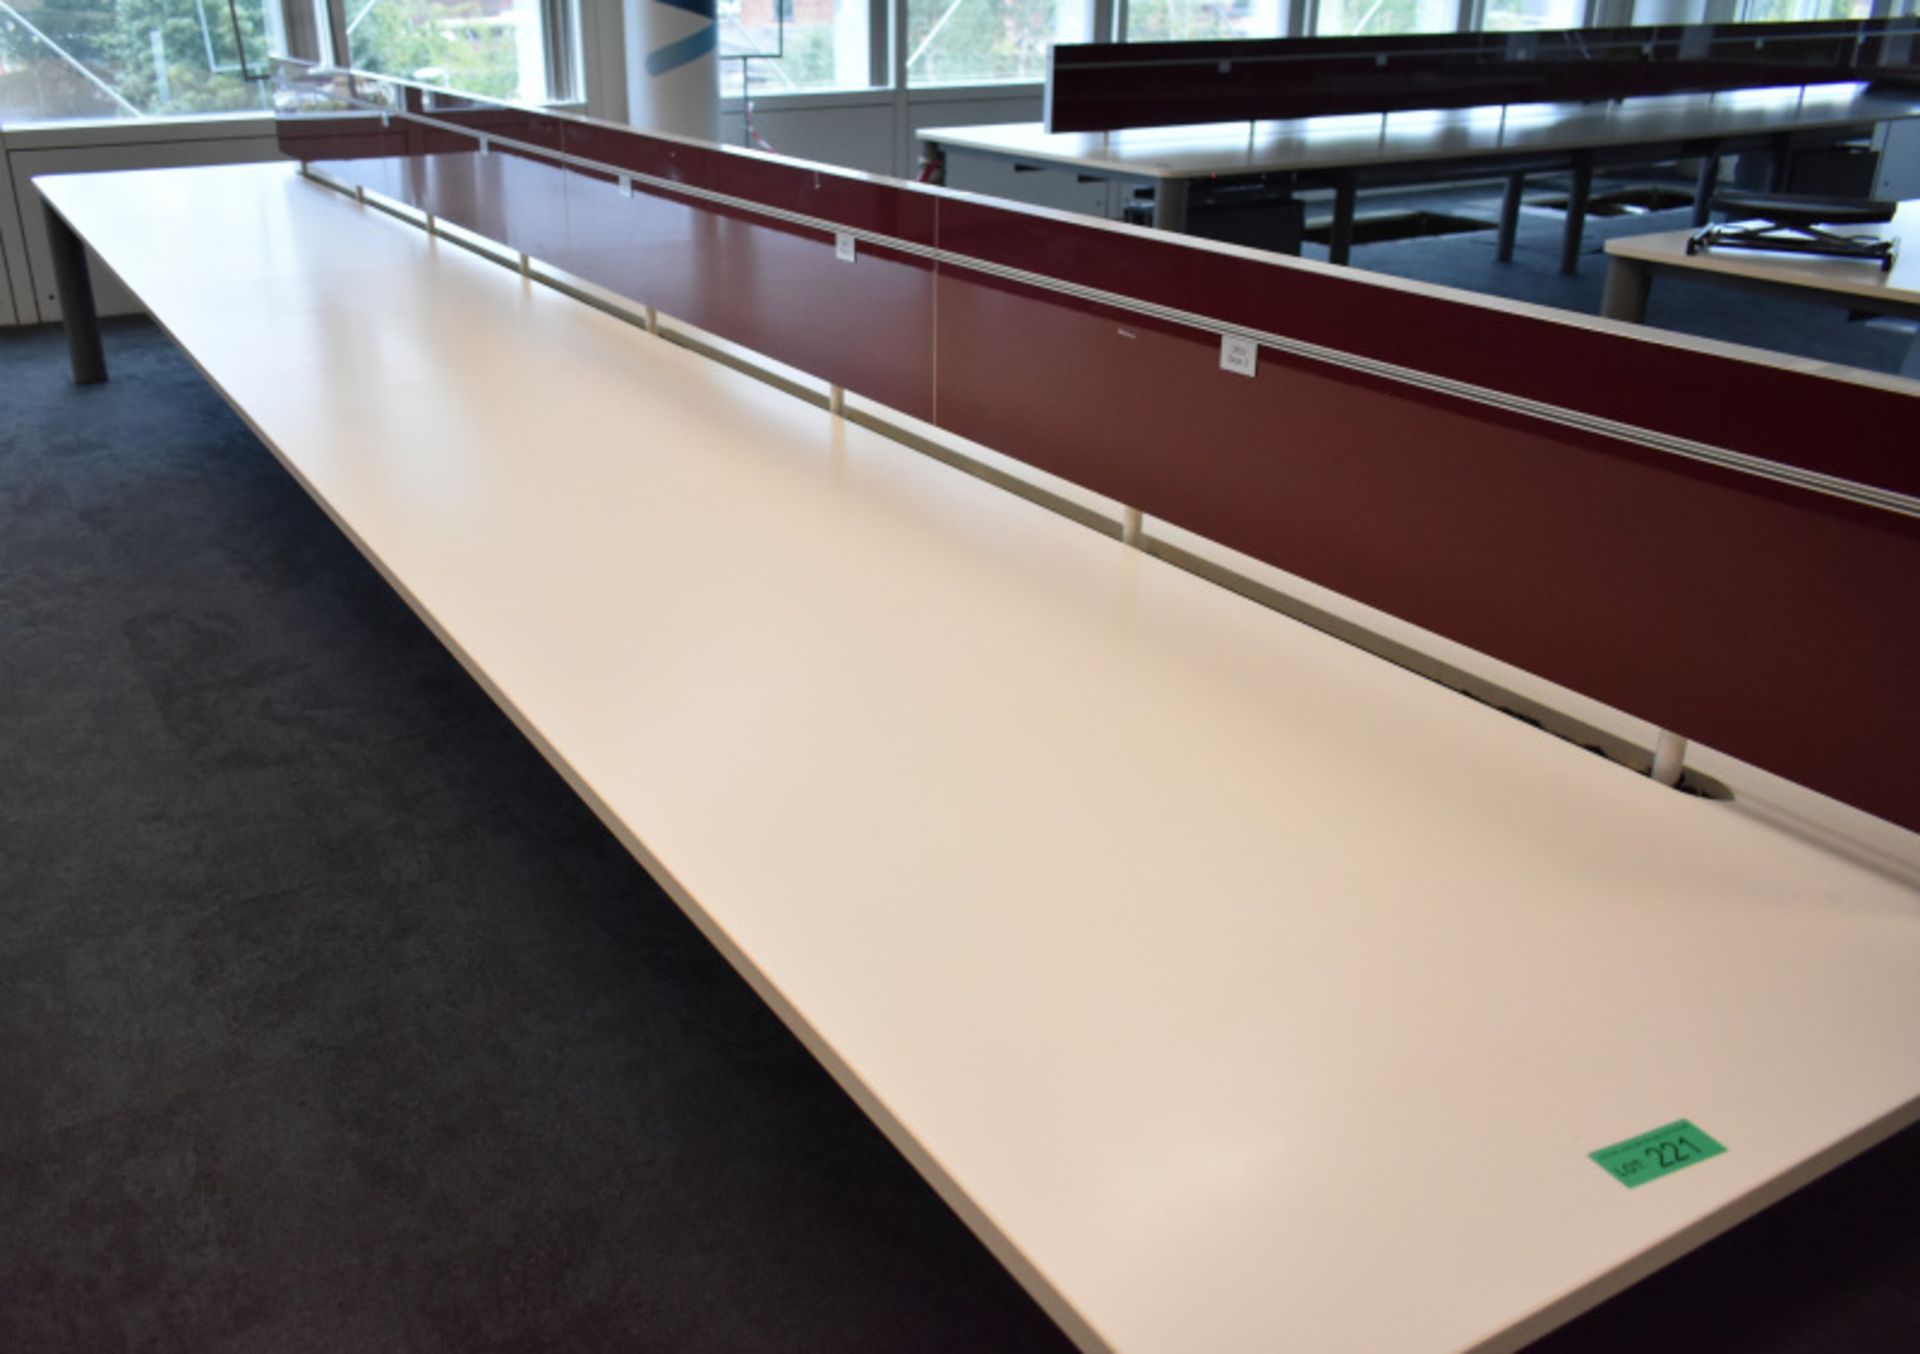 Bank of desks, seating 12, L 6500mm x W 1800mm x H 1180mm, buyer to dismantle and remove - Image 2 of 4